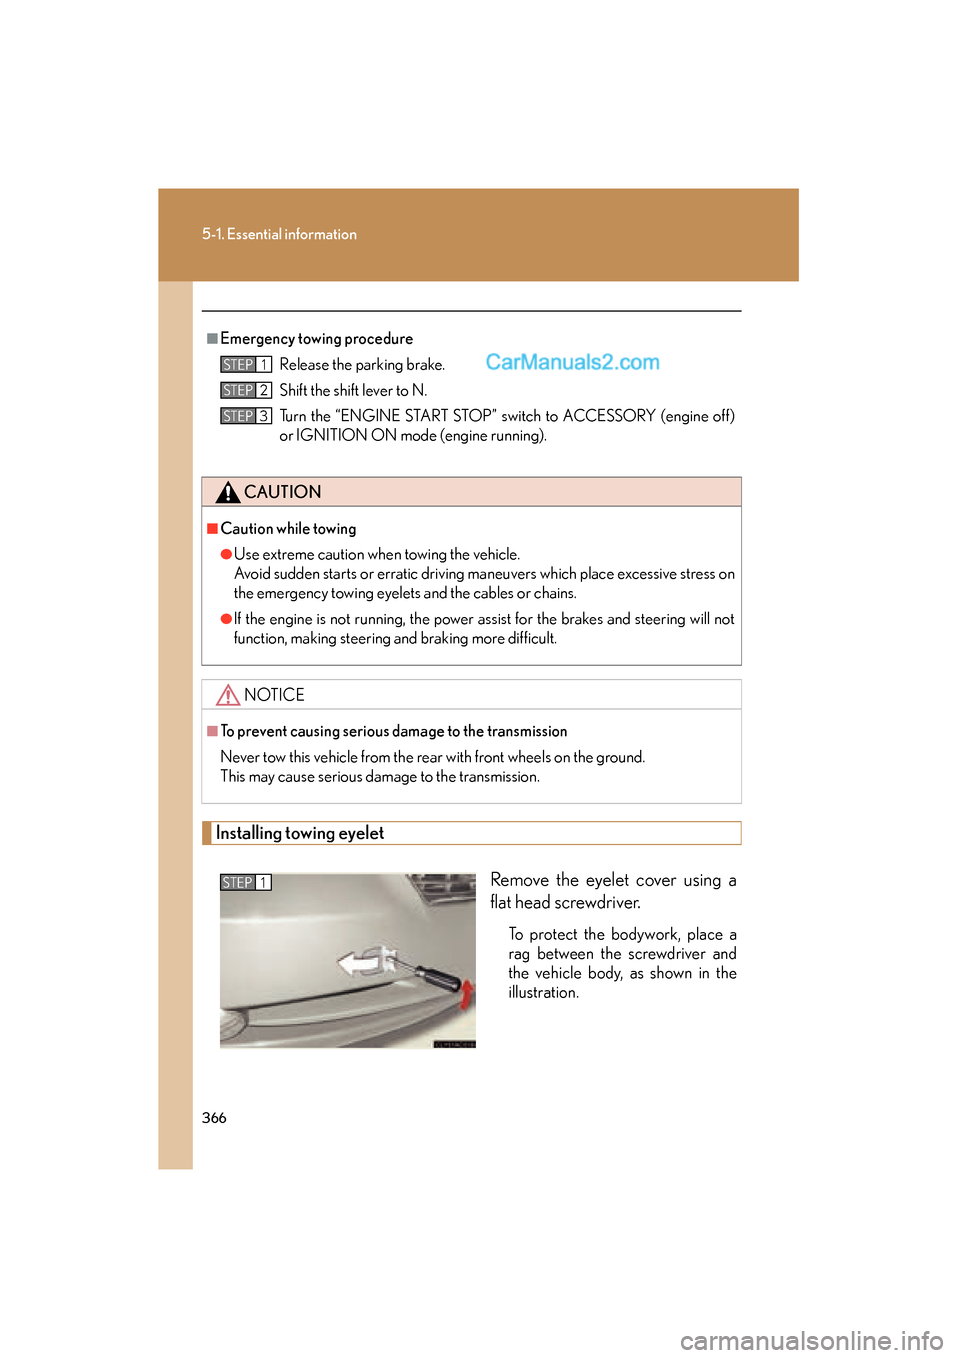 Lexus ES350 2009  Owners Manual 366
5-1. Essential information
ES350_U_(L/O_0808)
Installing towing eyeletRemove the eyelet cover using a
flat head screwdriver. 
To protect the bodywork, place a
rag between the screwdriver and
the v